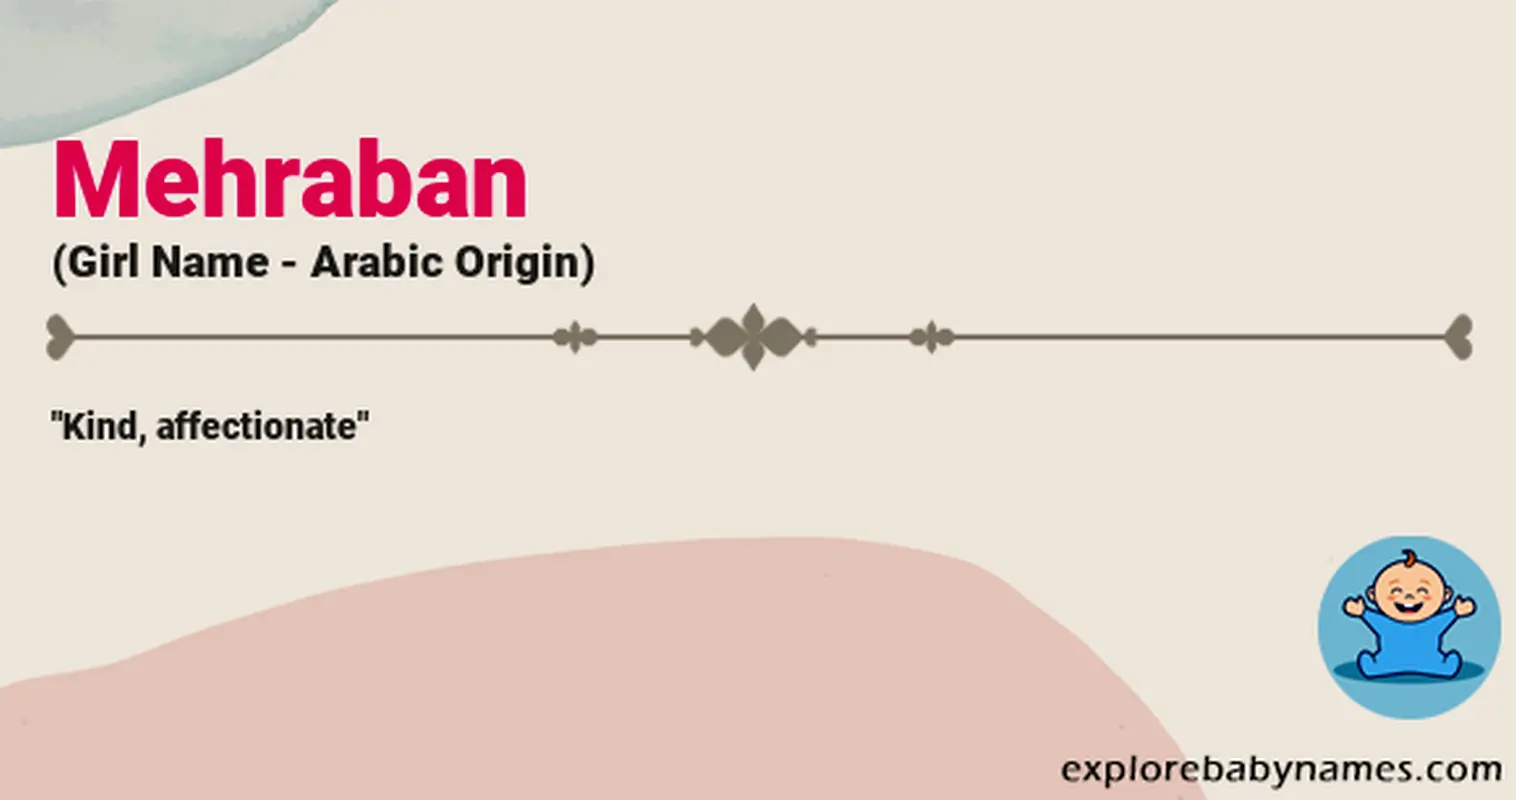 Meaning of Mehraban